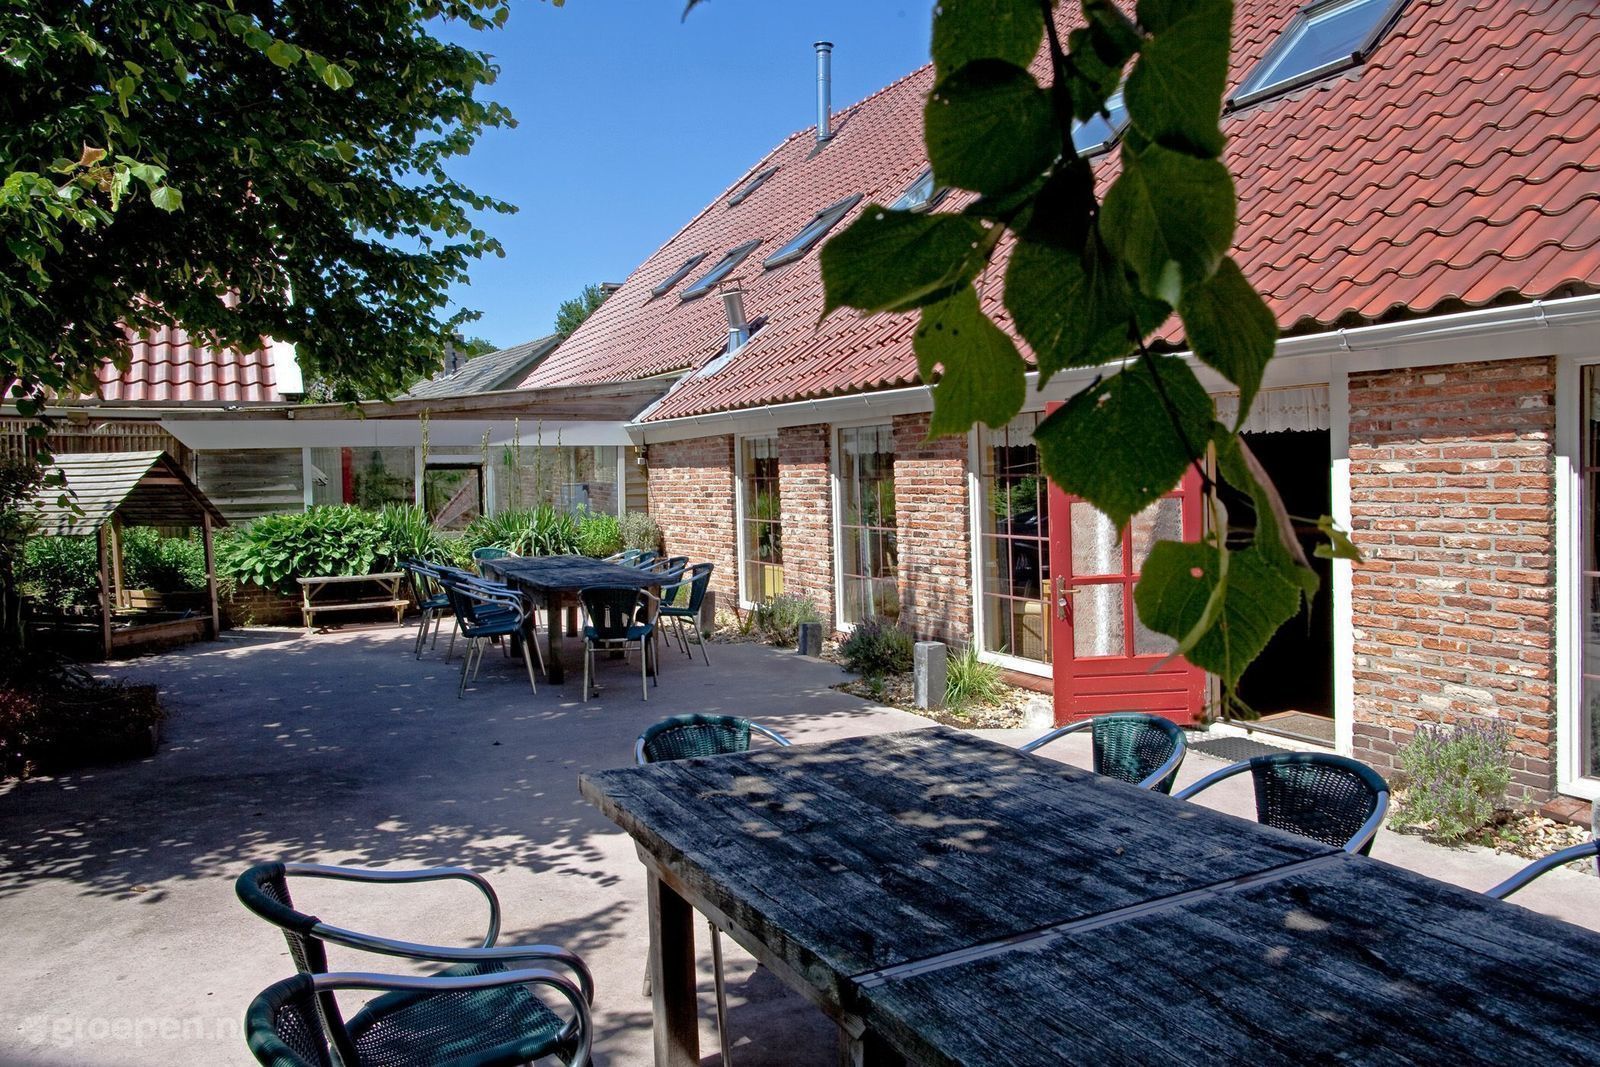 Group accommodation Diever